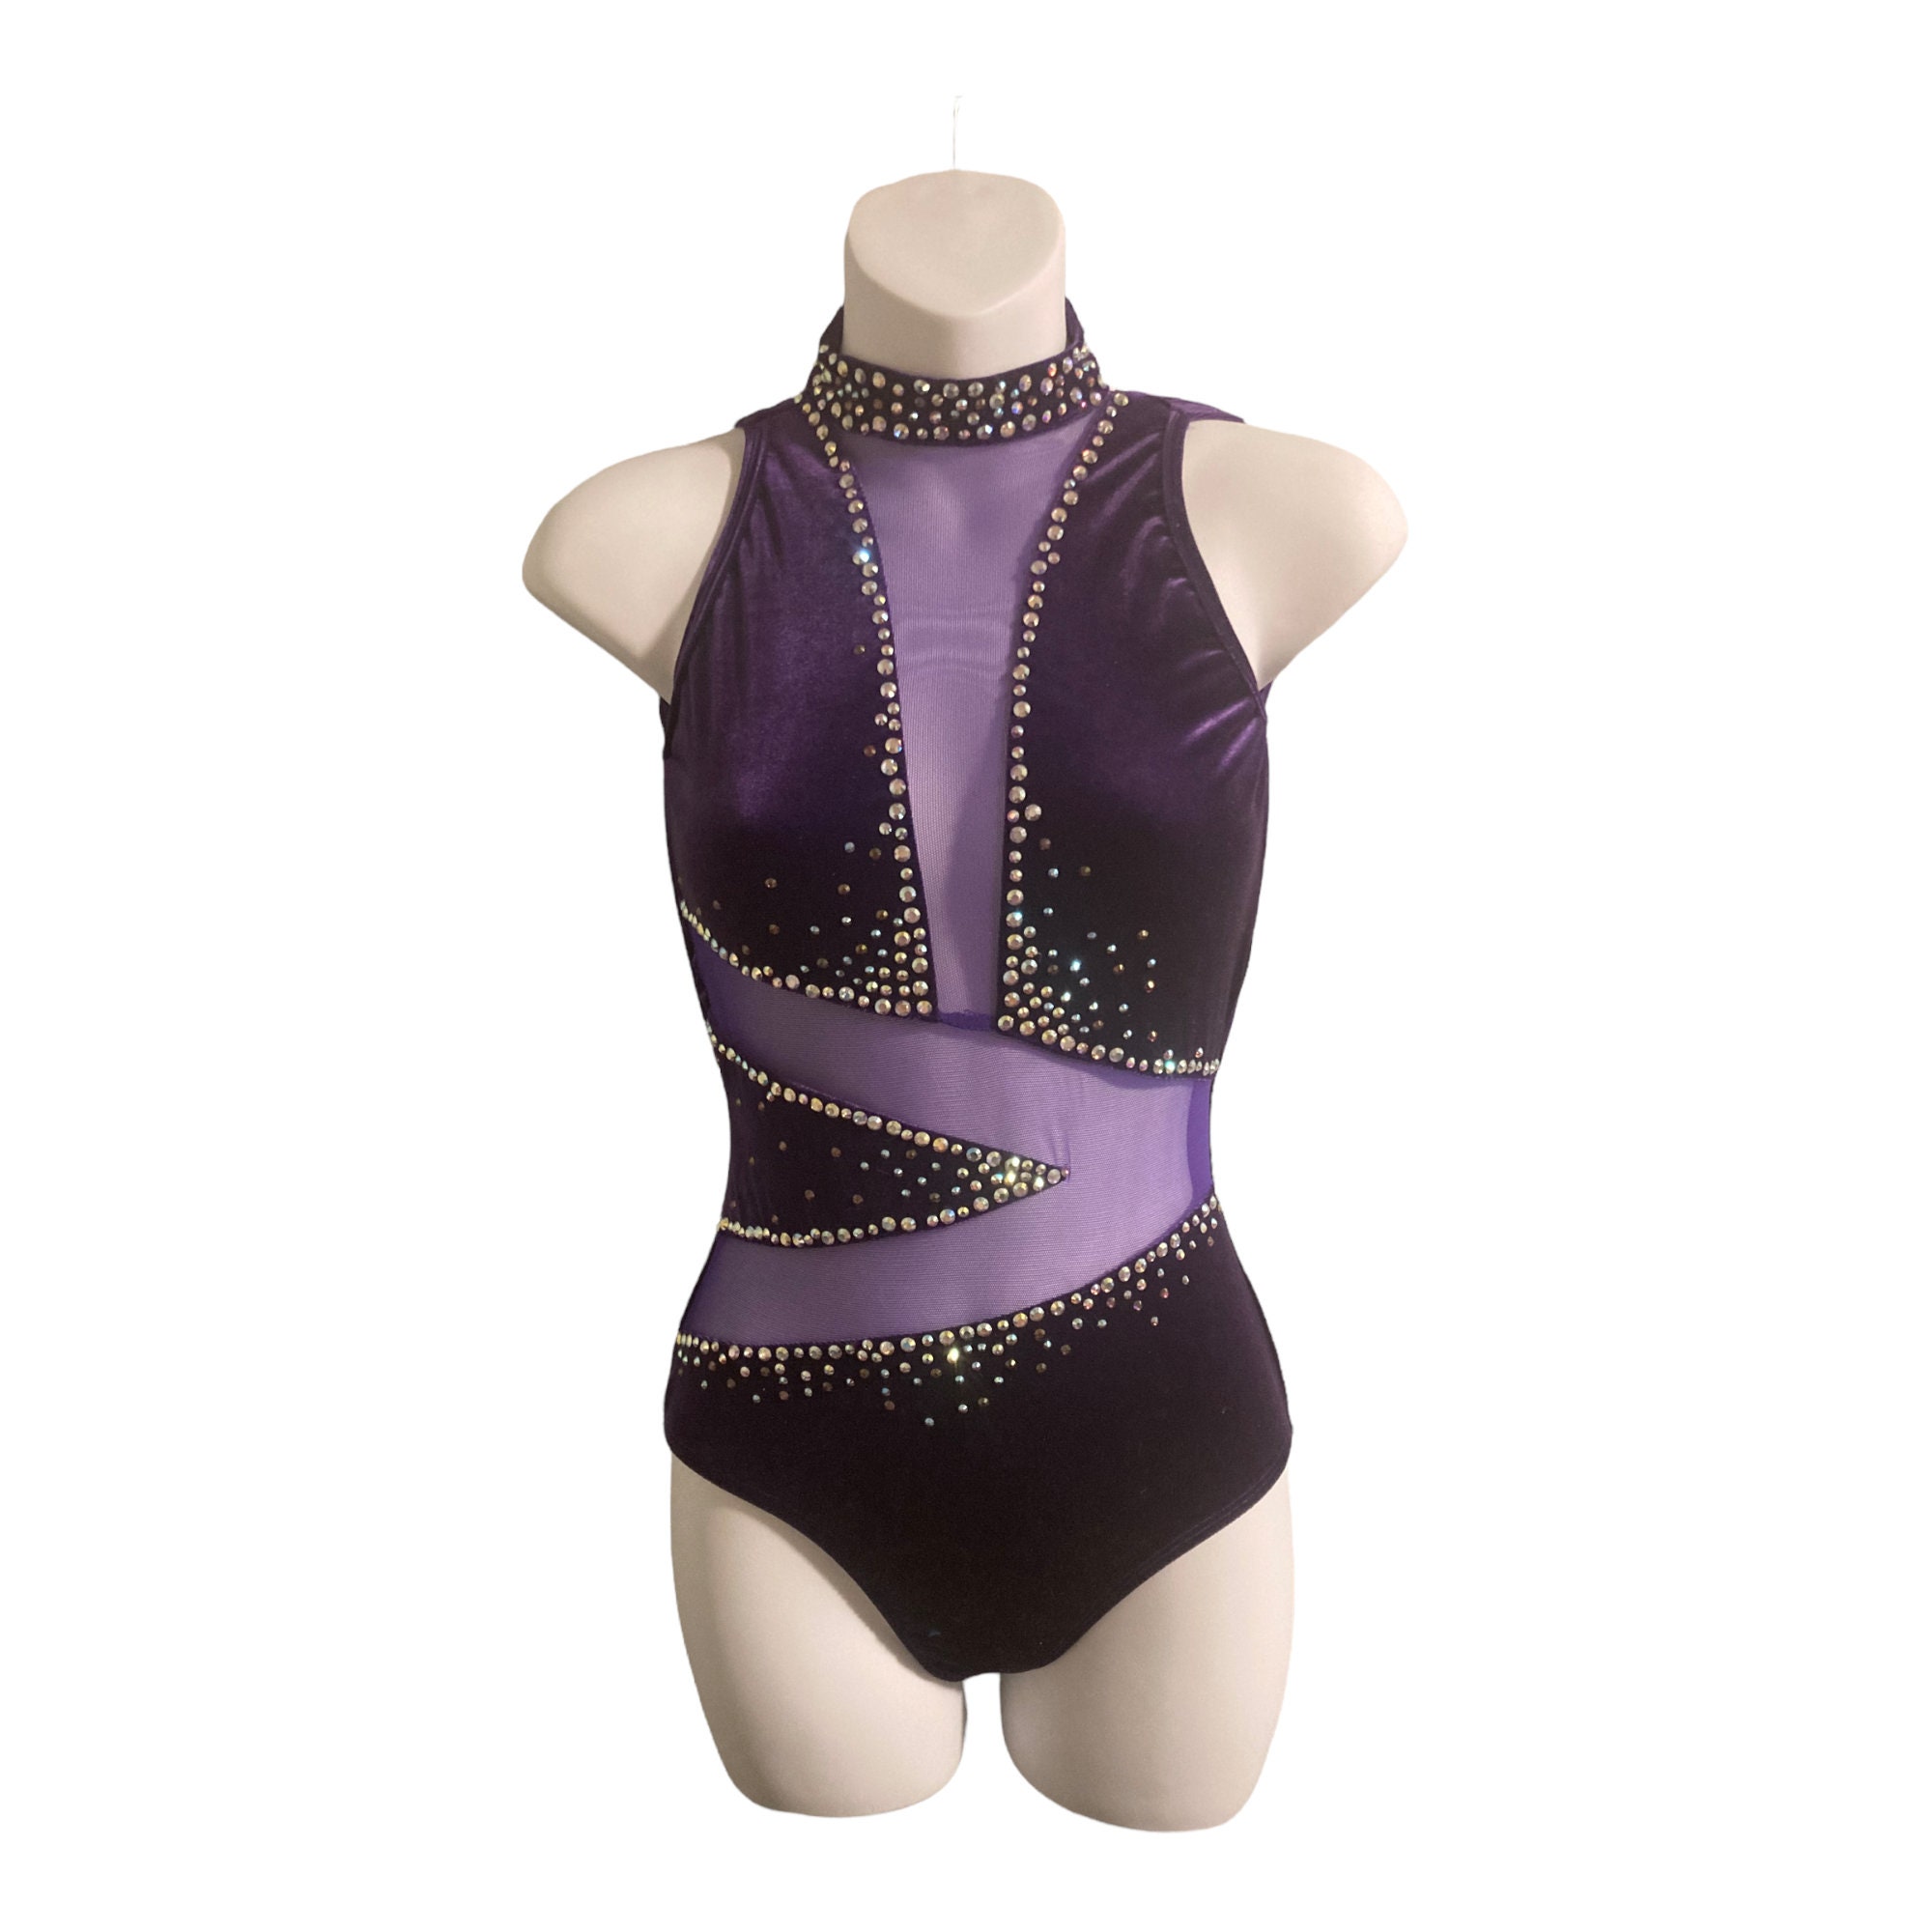 Dance costume, competitive costume, velvet bodysuit with mesh and crystals